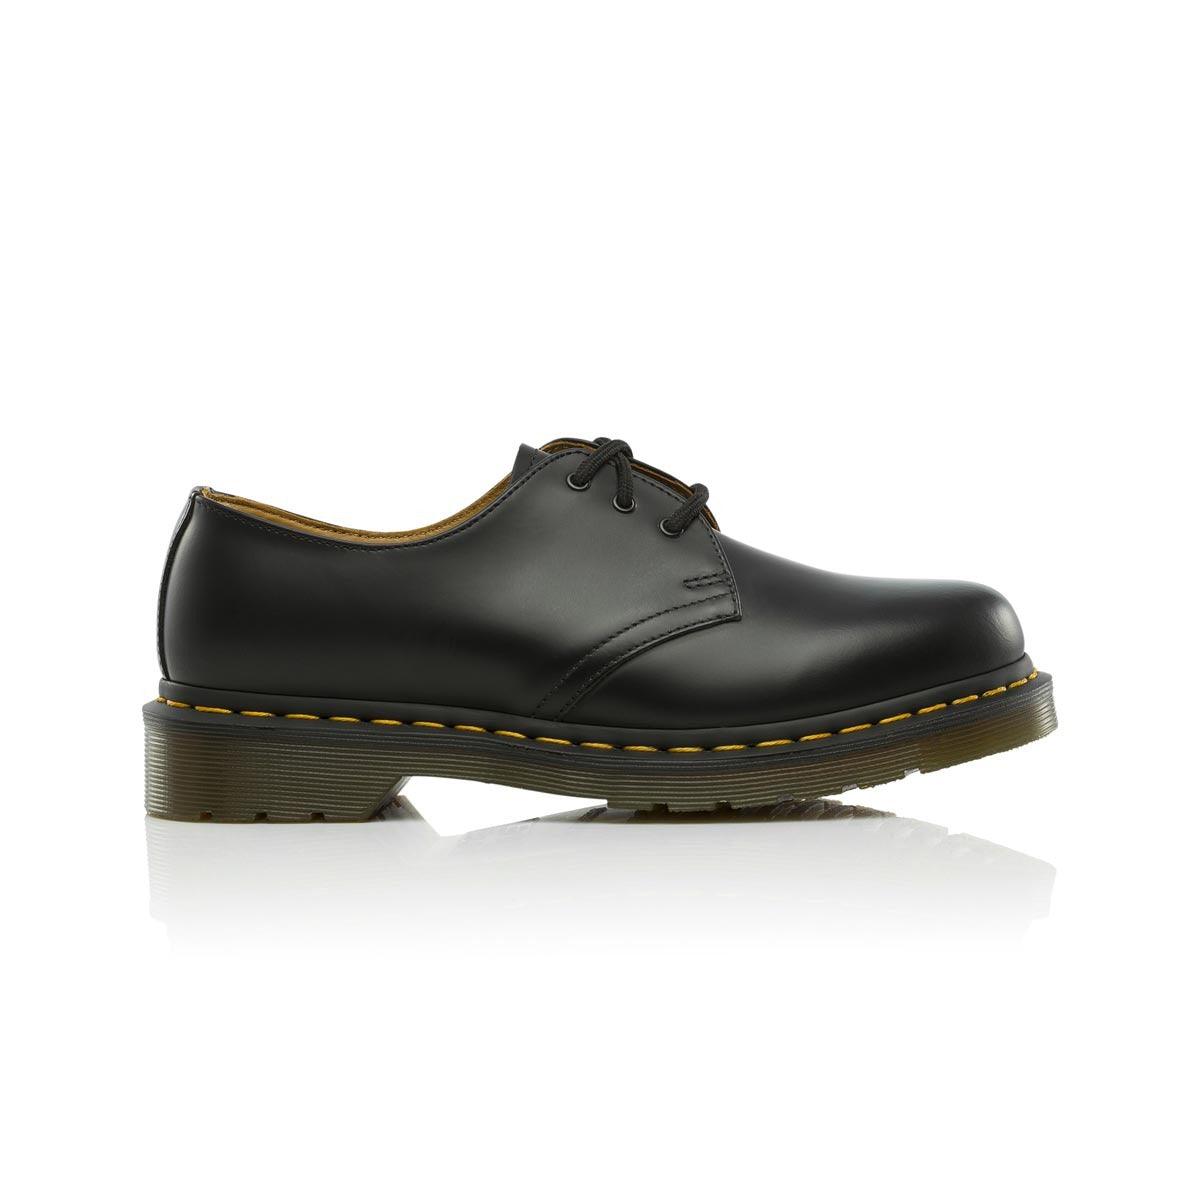 Dr Martens 1461 Smooth - The Next Pair